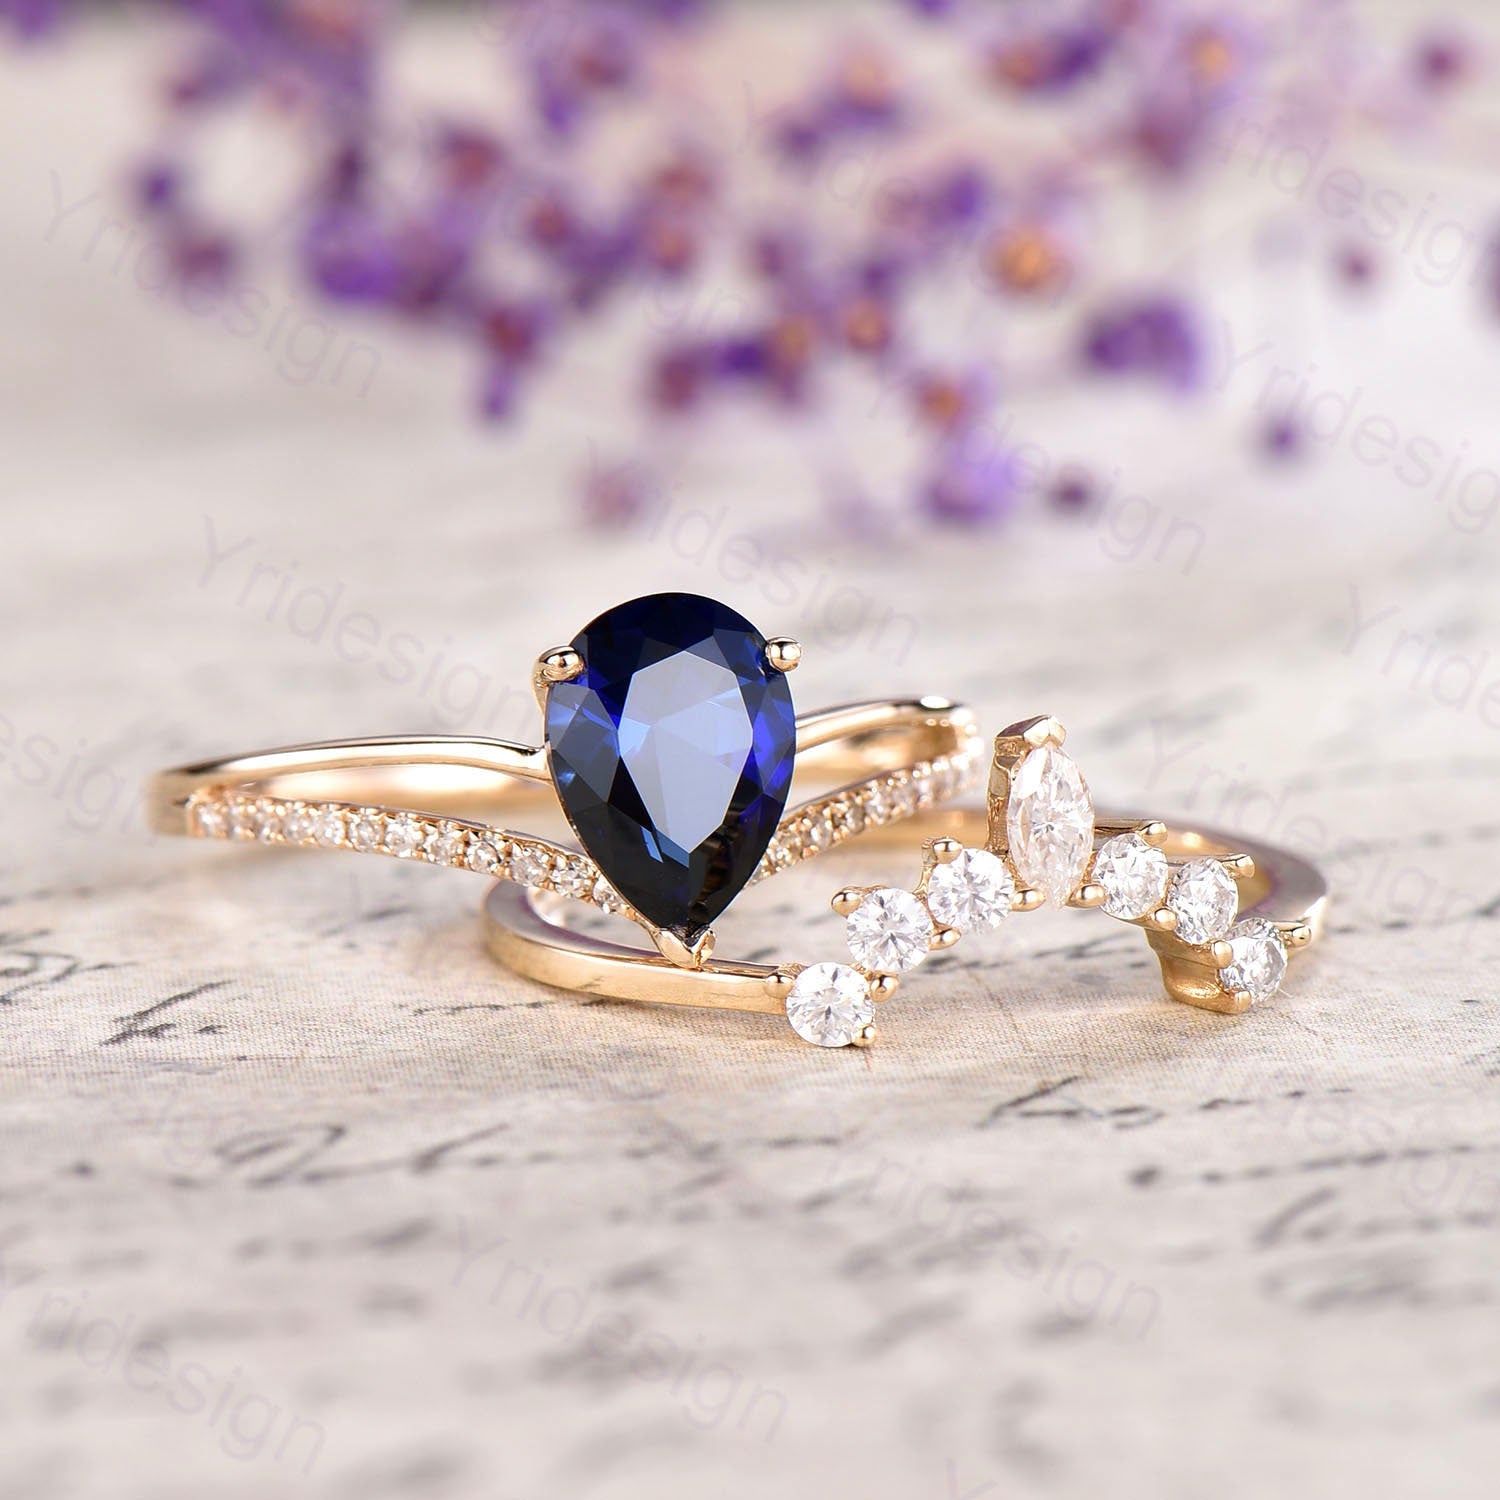 Vintage Sapphire Wedding Set Pear Shaped Sapphire Engagement Ring crown moissanite wedding band antique classic anniversary promise ring - PENFINE